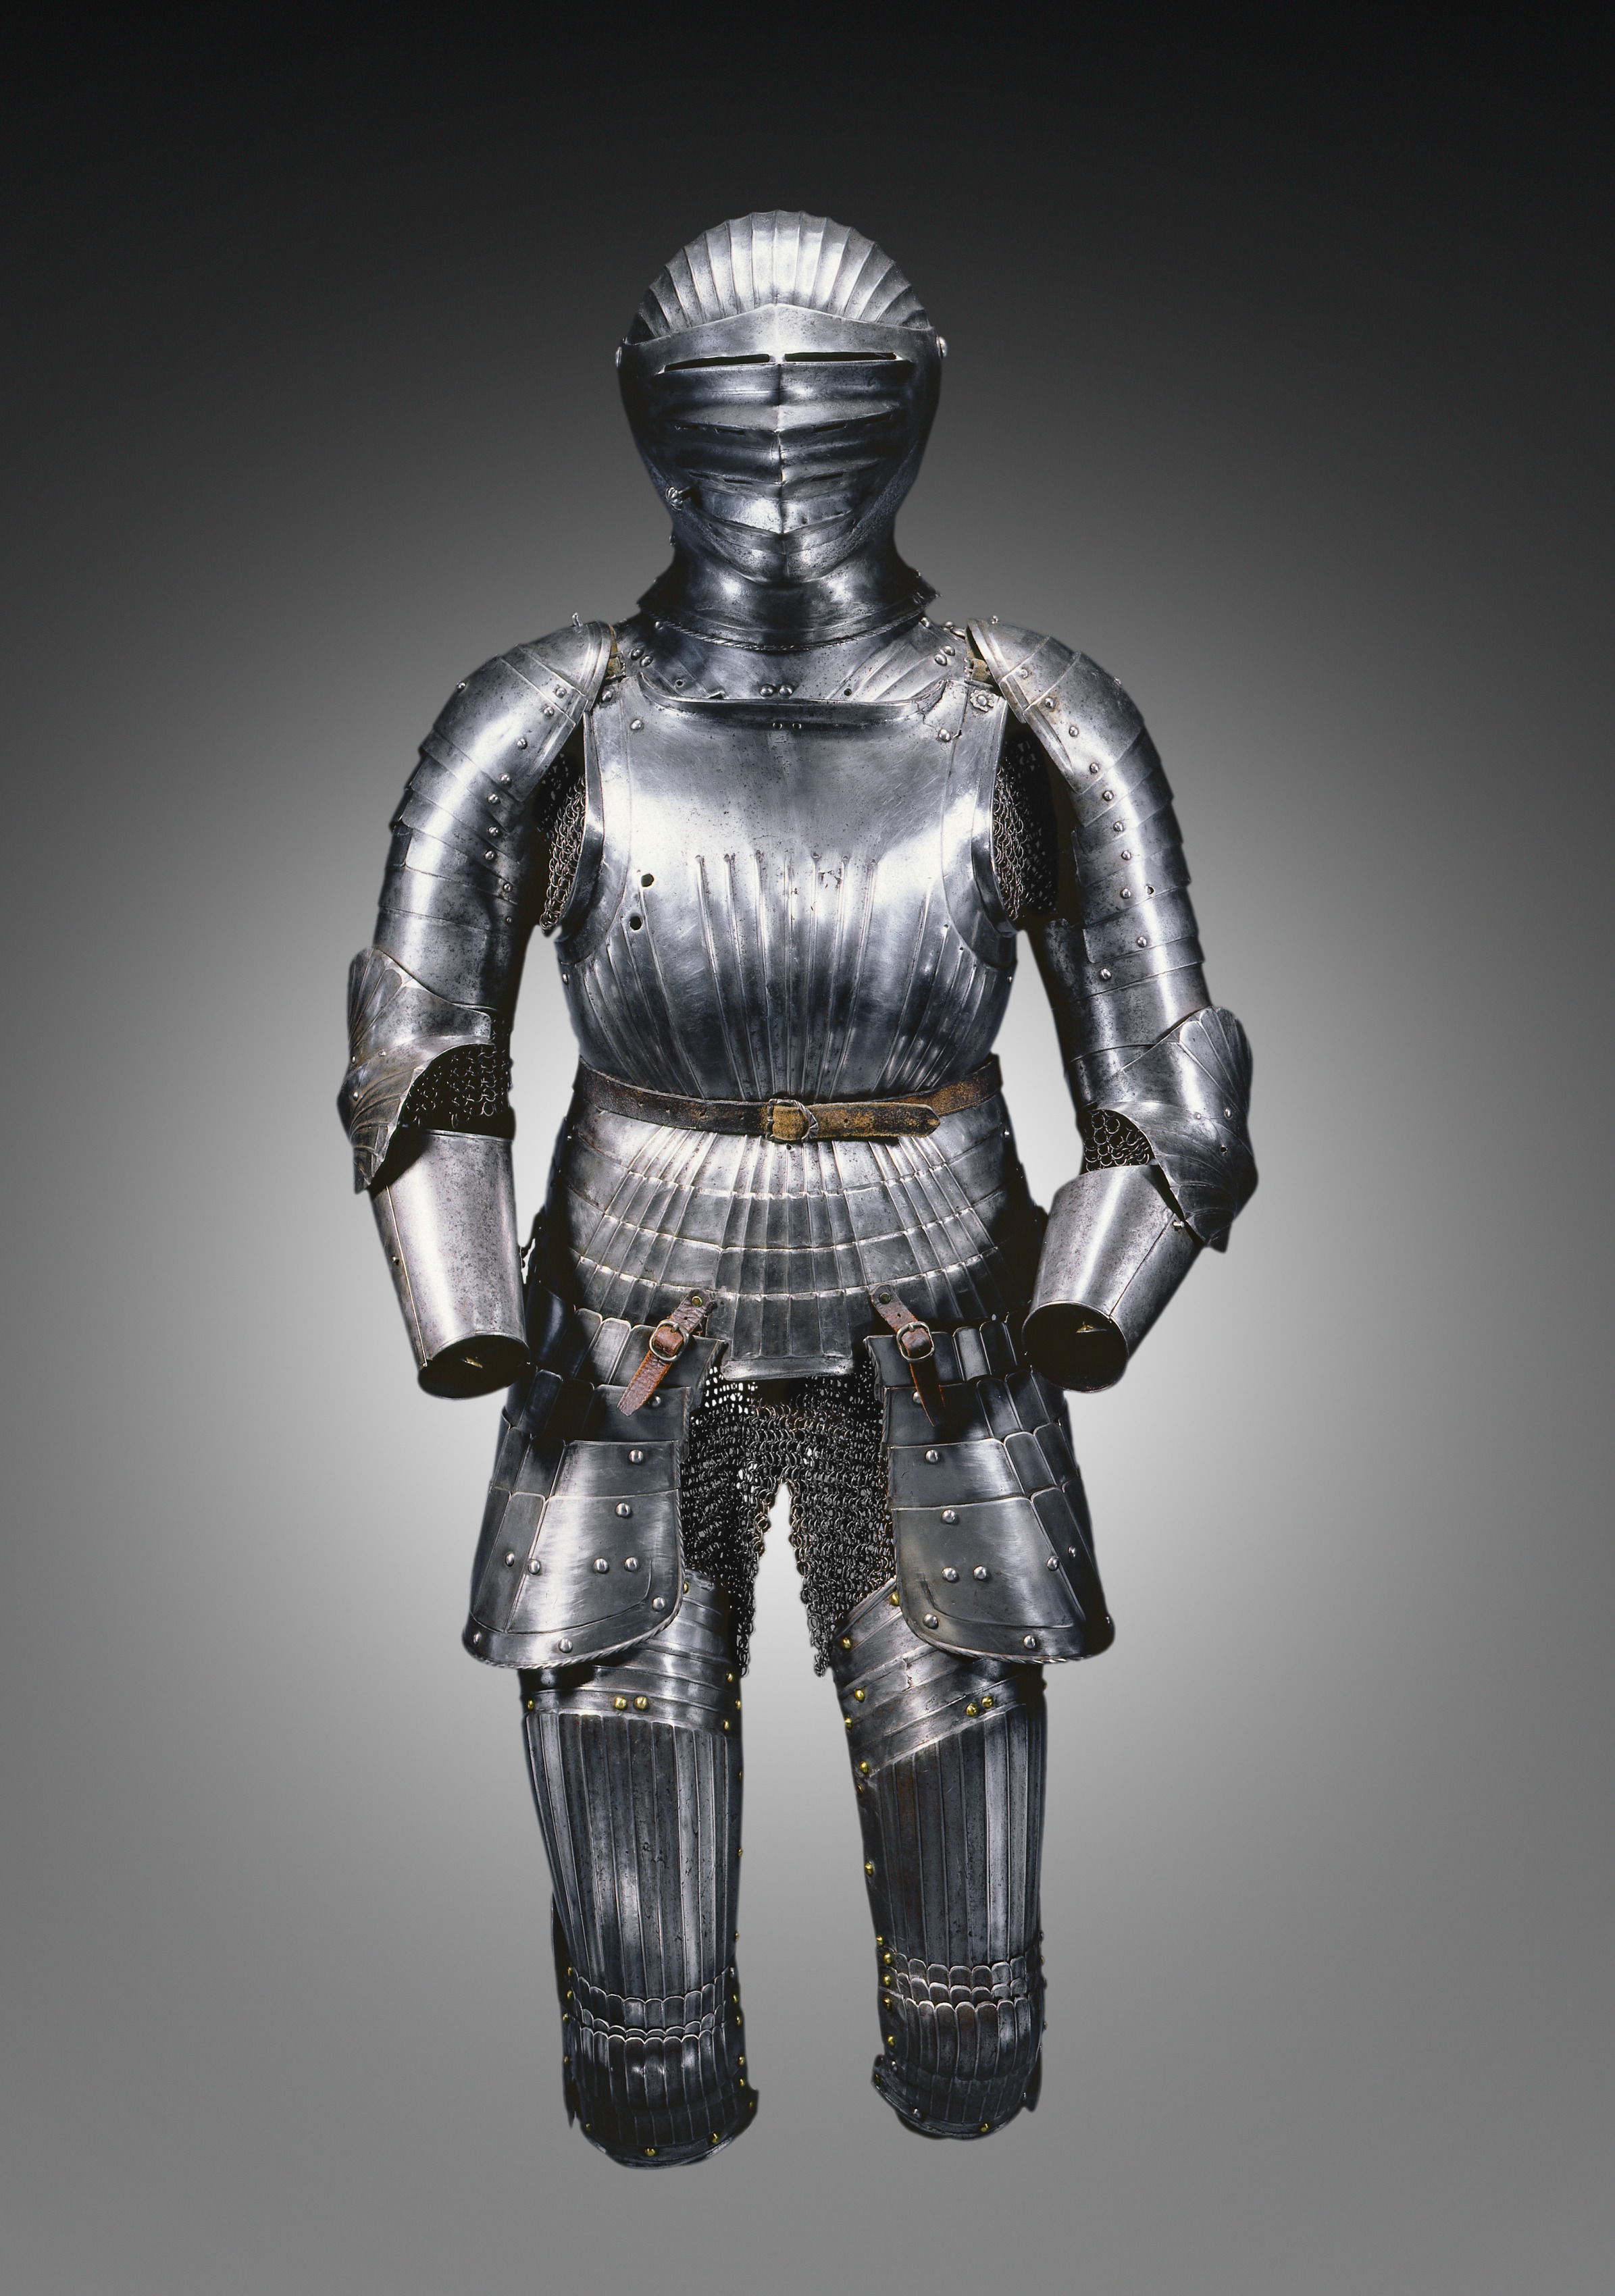 Partial Suit of Armor in Maximilian Style